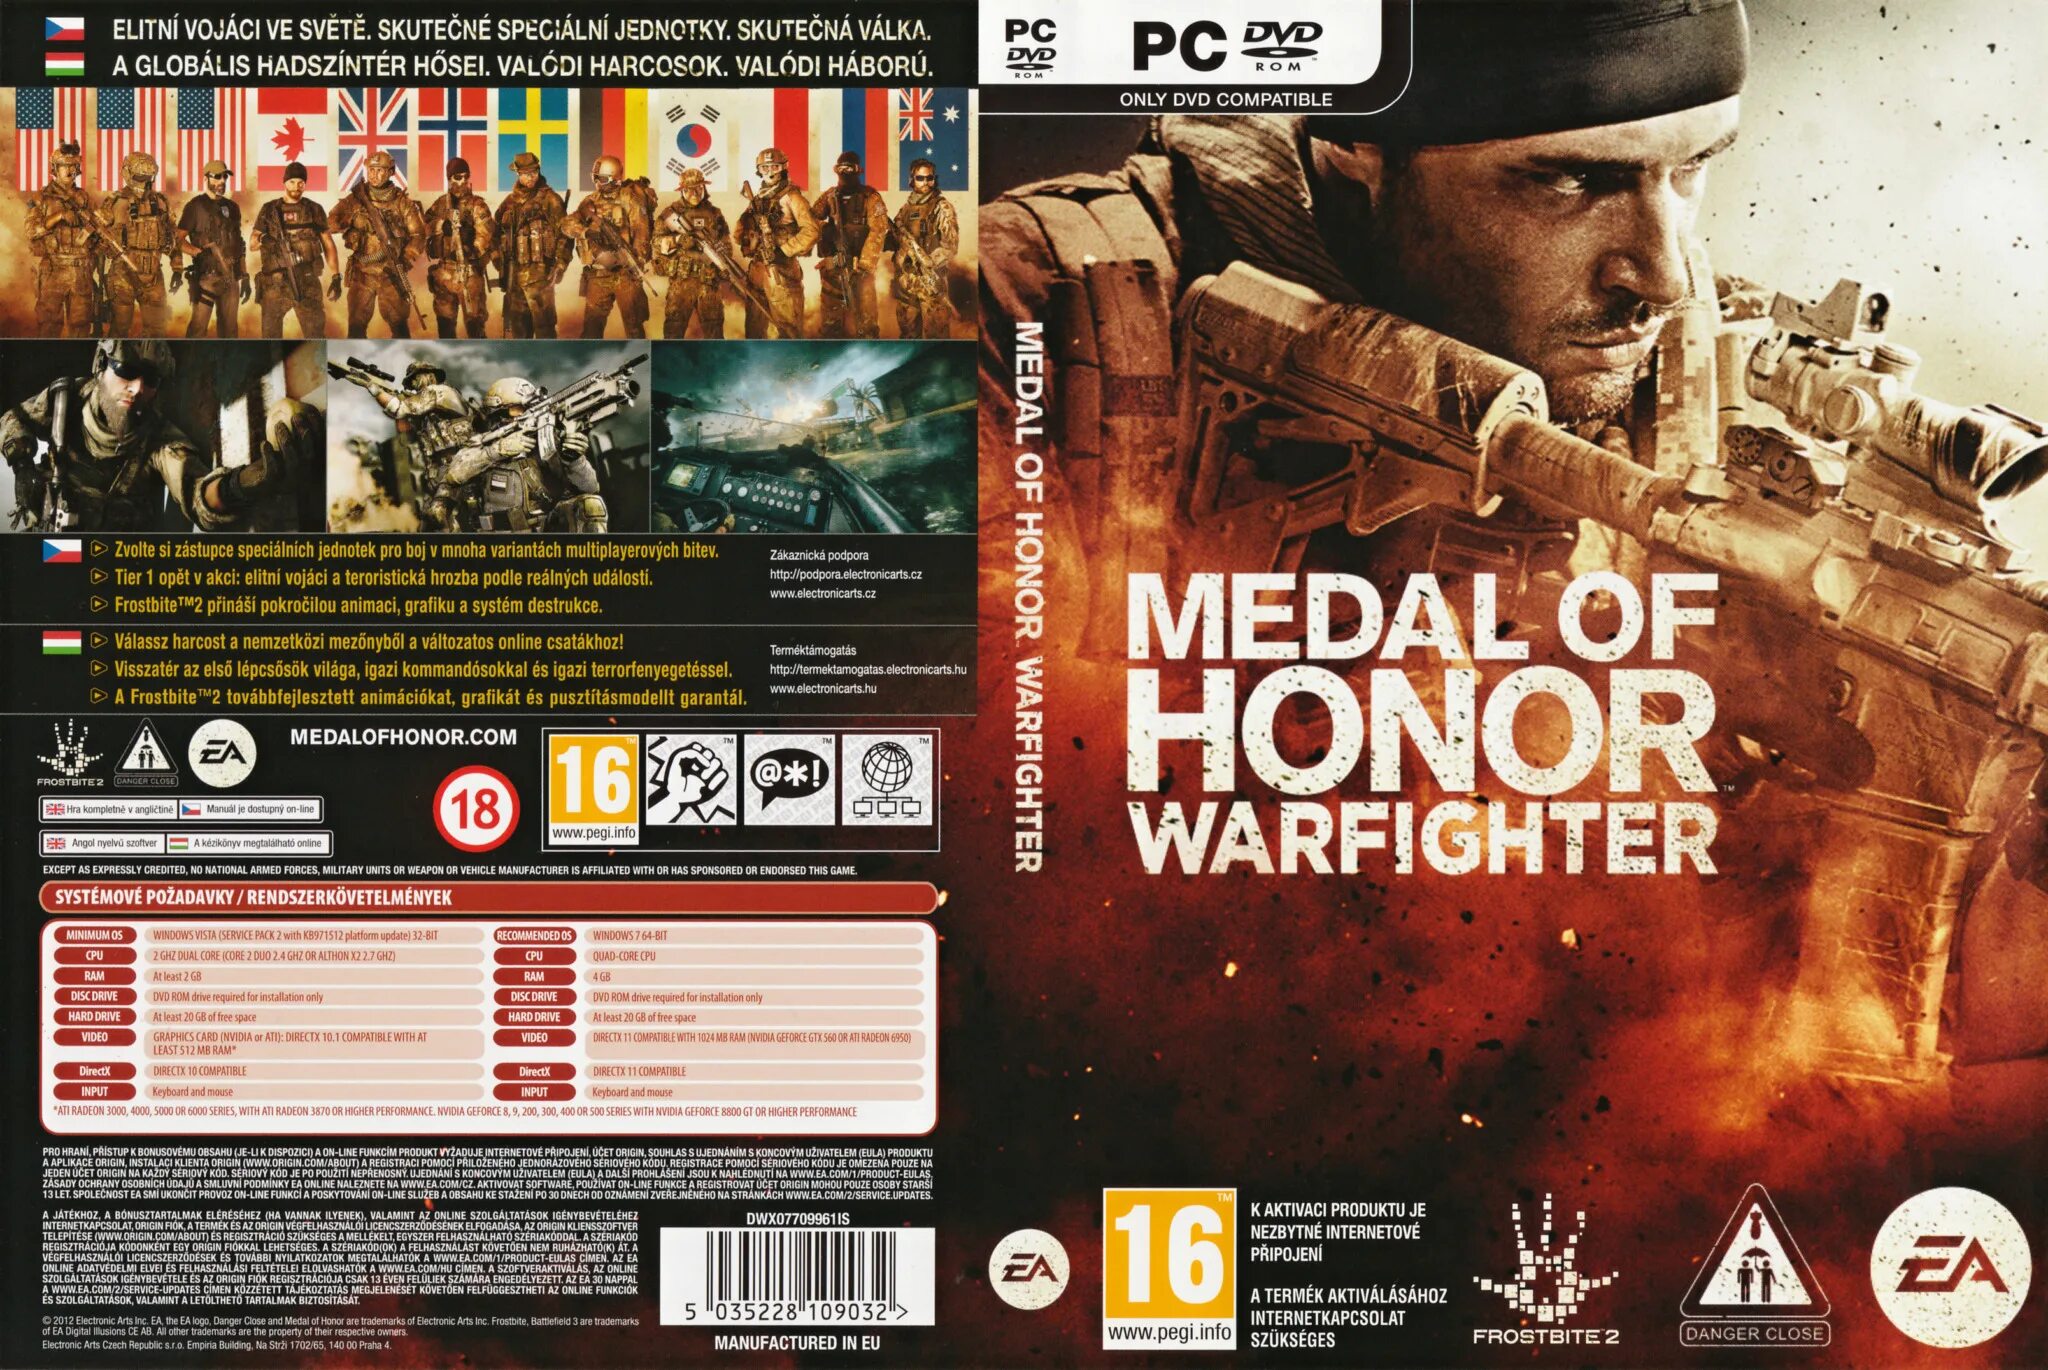 Medal of honor читы. Medal of Honor Warfighter ps3 обложка. Диск медал оф хонор. Medal of Honor: Warfighter (2012). Xbox 360 обложка диска Medal of Honor Warfighter.